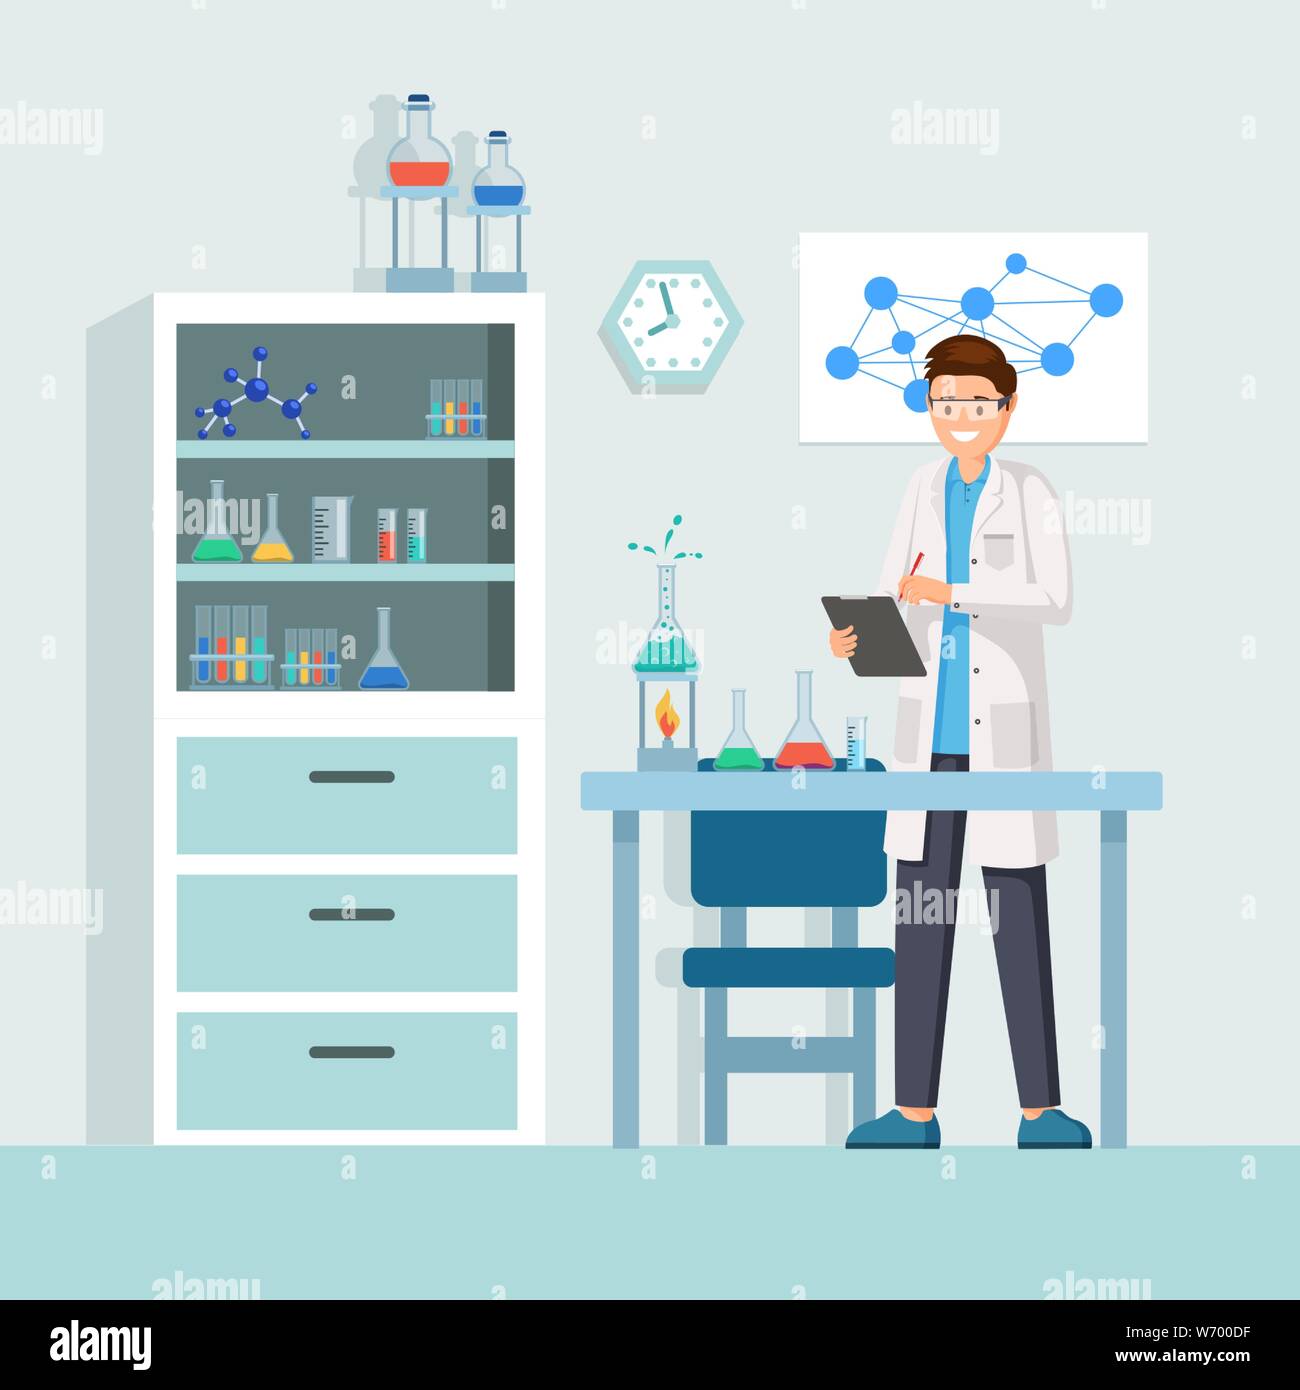 Scientist at work vector illustration. Male lab worker taking notes, describing test, chemical reaction cartoon character. Cheerful researcher doing experiments in laboratory, using lab equipment Stock Vector